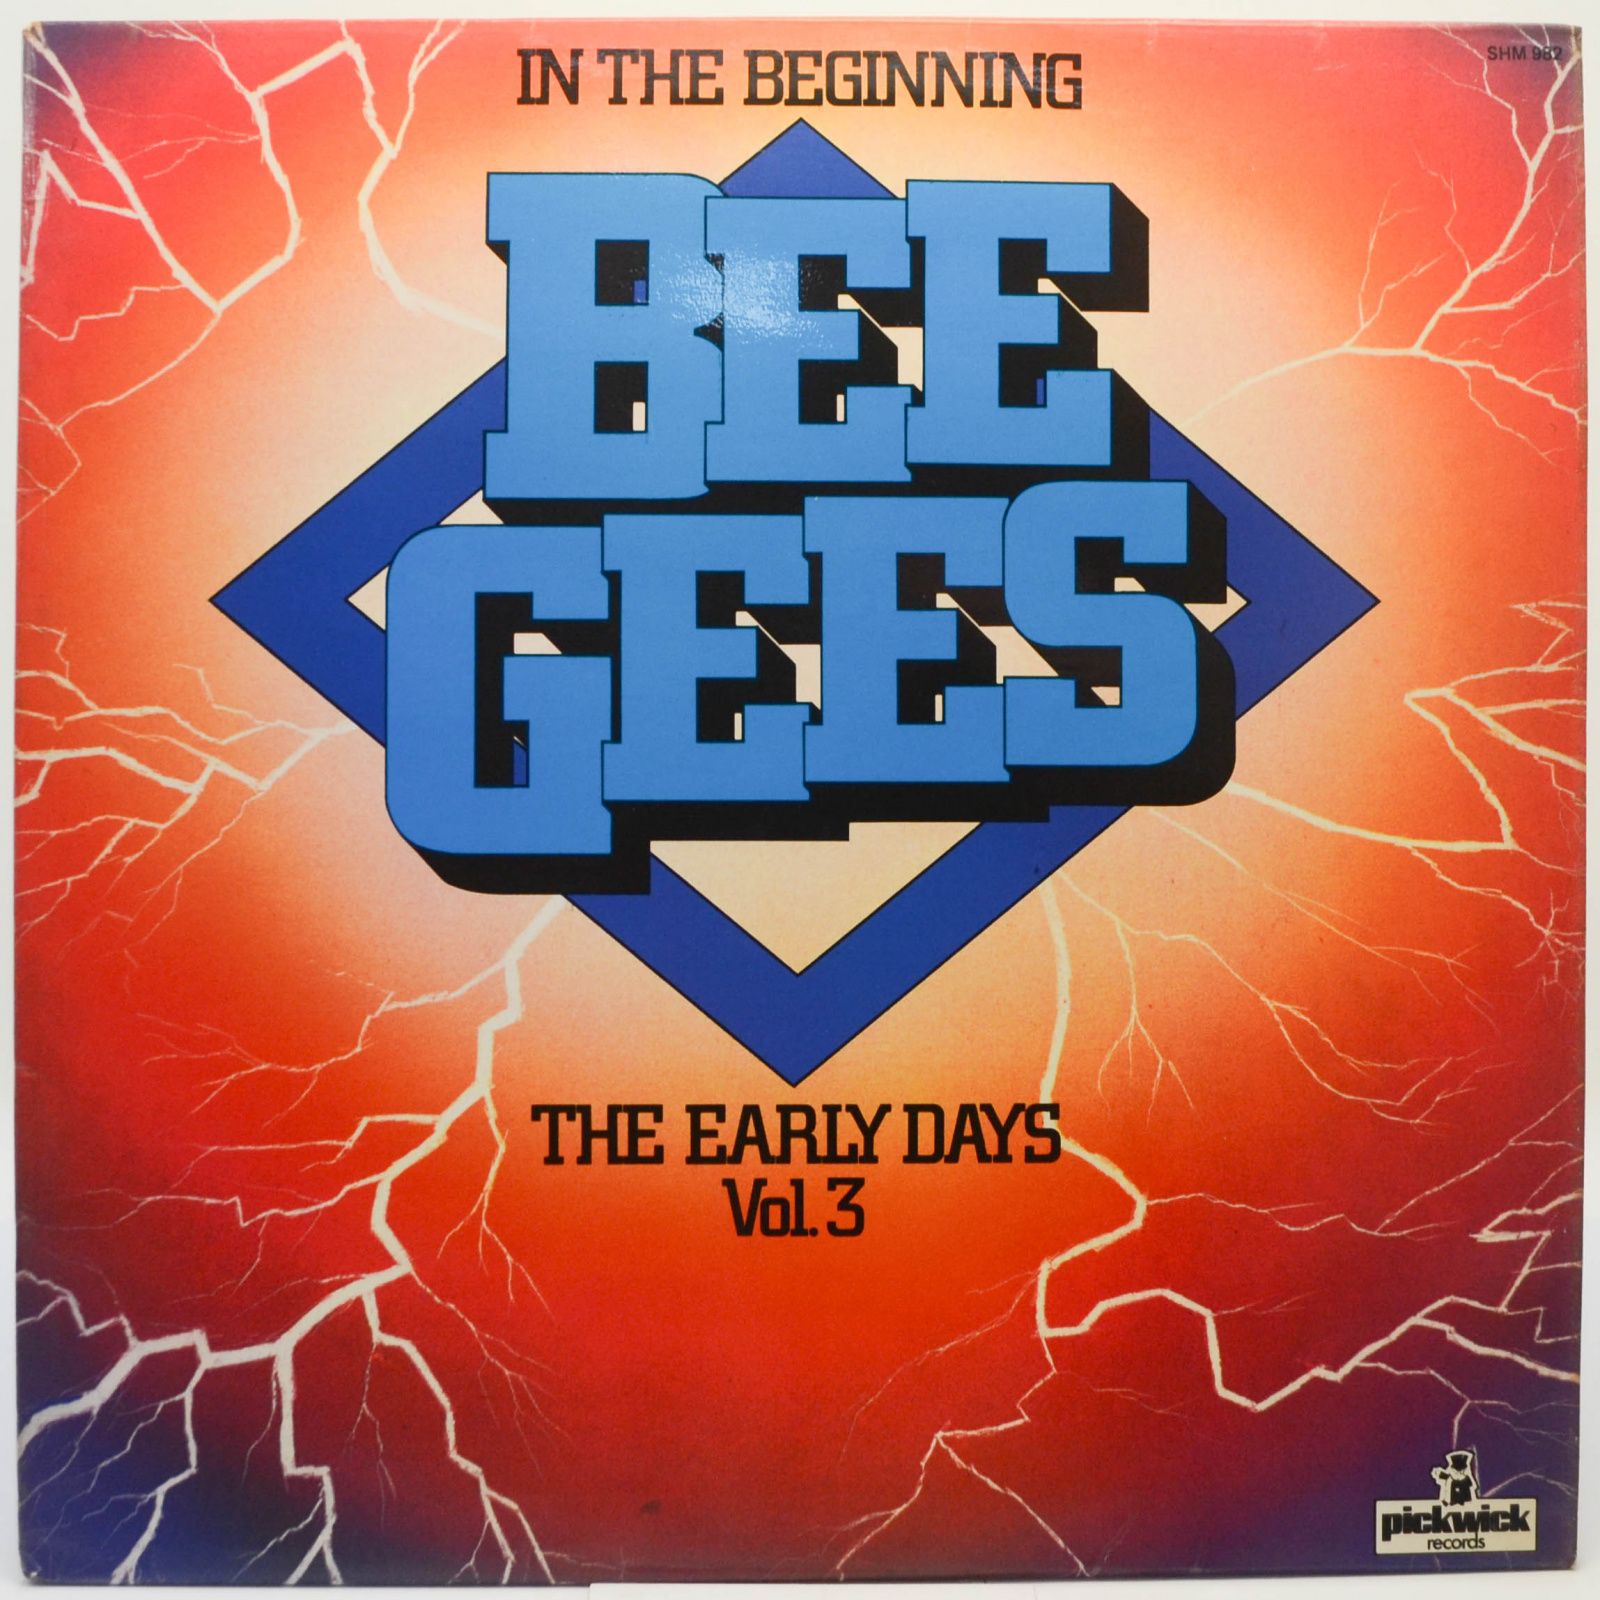 In The Beginning - The Early Days Vol. 3 (UK), 1978